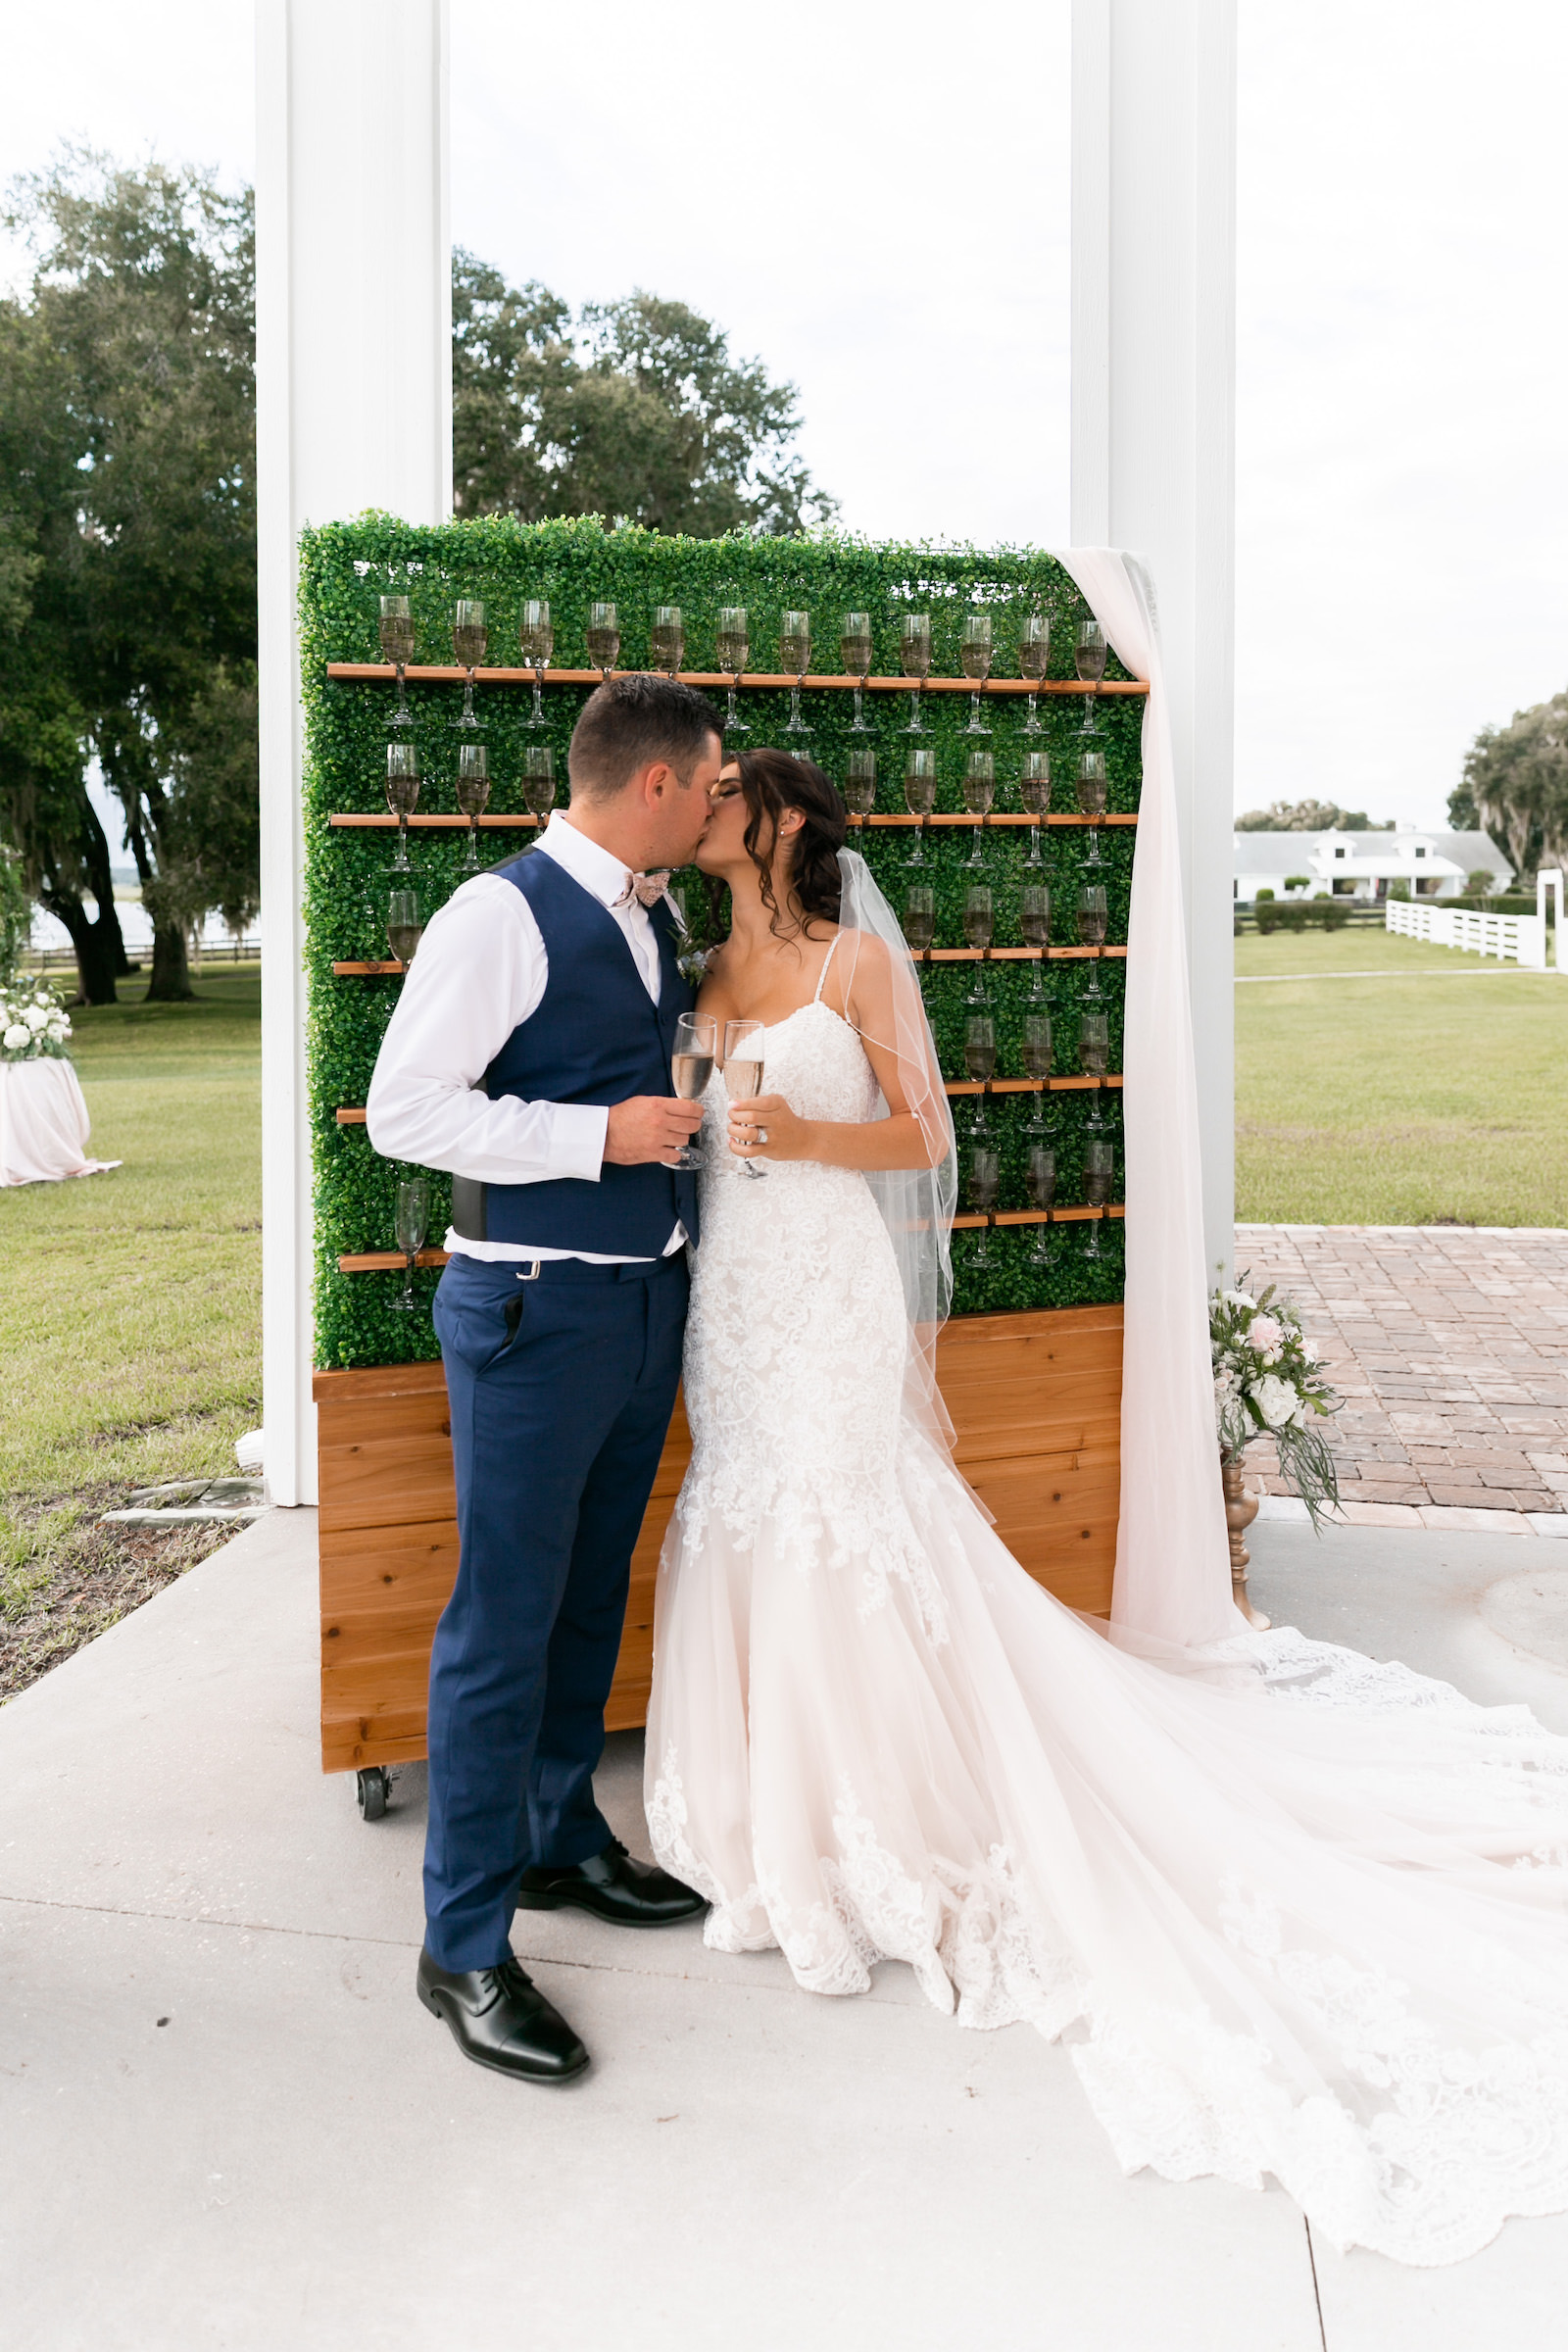 Bride and Groom Kissing In Front of Champagne Greenery Wall Wedding Portrait | Tampa Reception Covington Farms